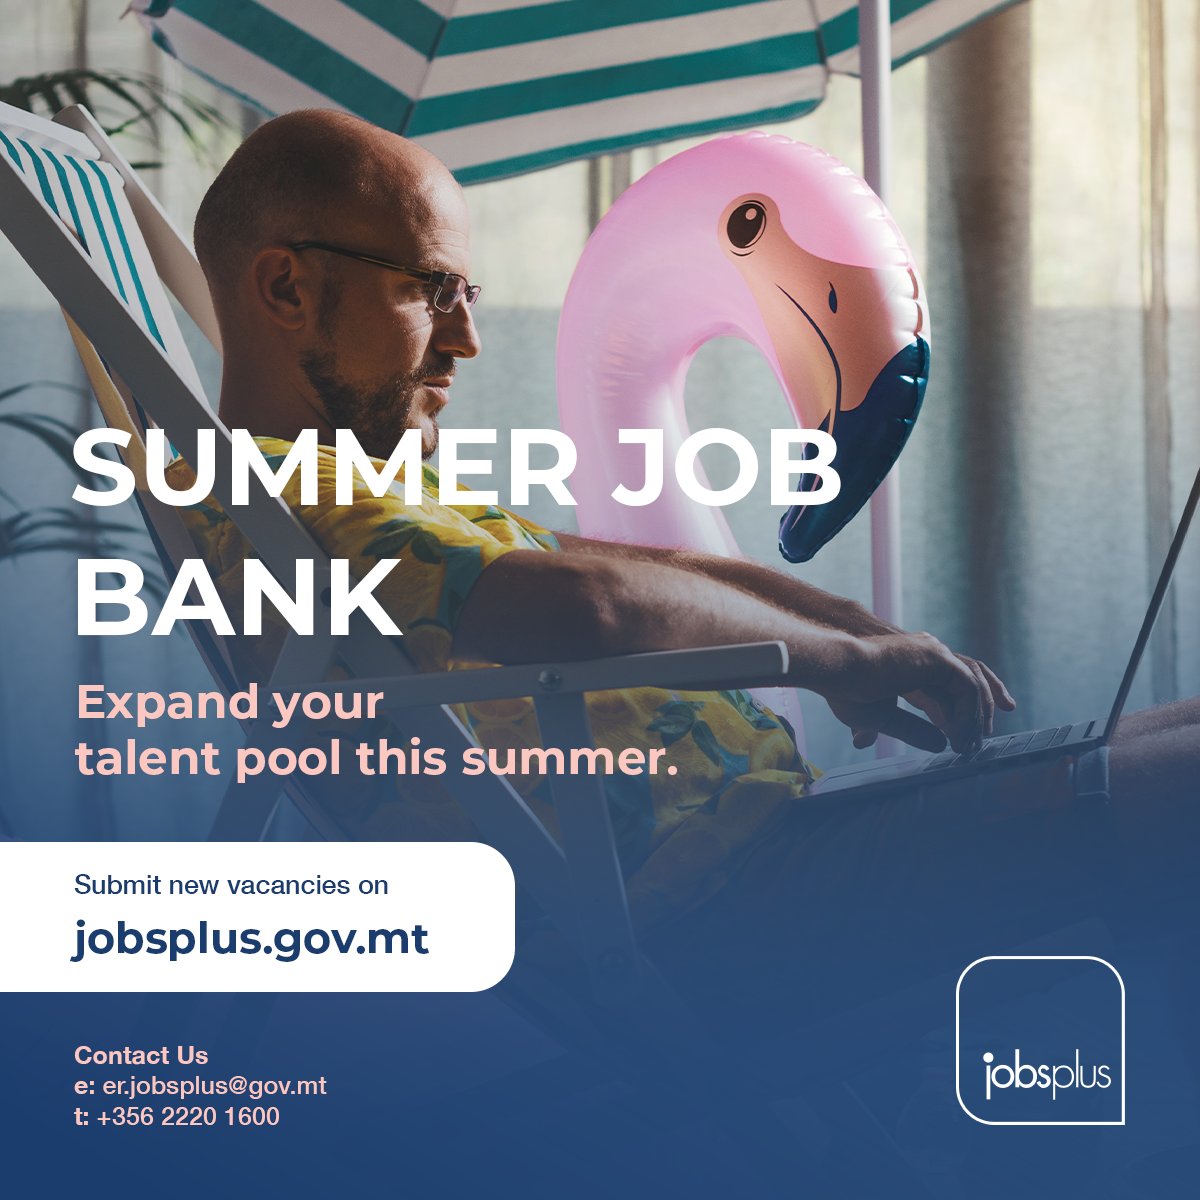 With #summer just around the corner, it's the perfect time to start planning for that extra help your #business needs to thrive. #Jobsplus is reaching out to all #employers who could use an extra set of hands, or ten, during the sunny months ahead❗️☀️🦩